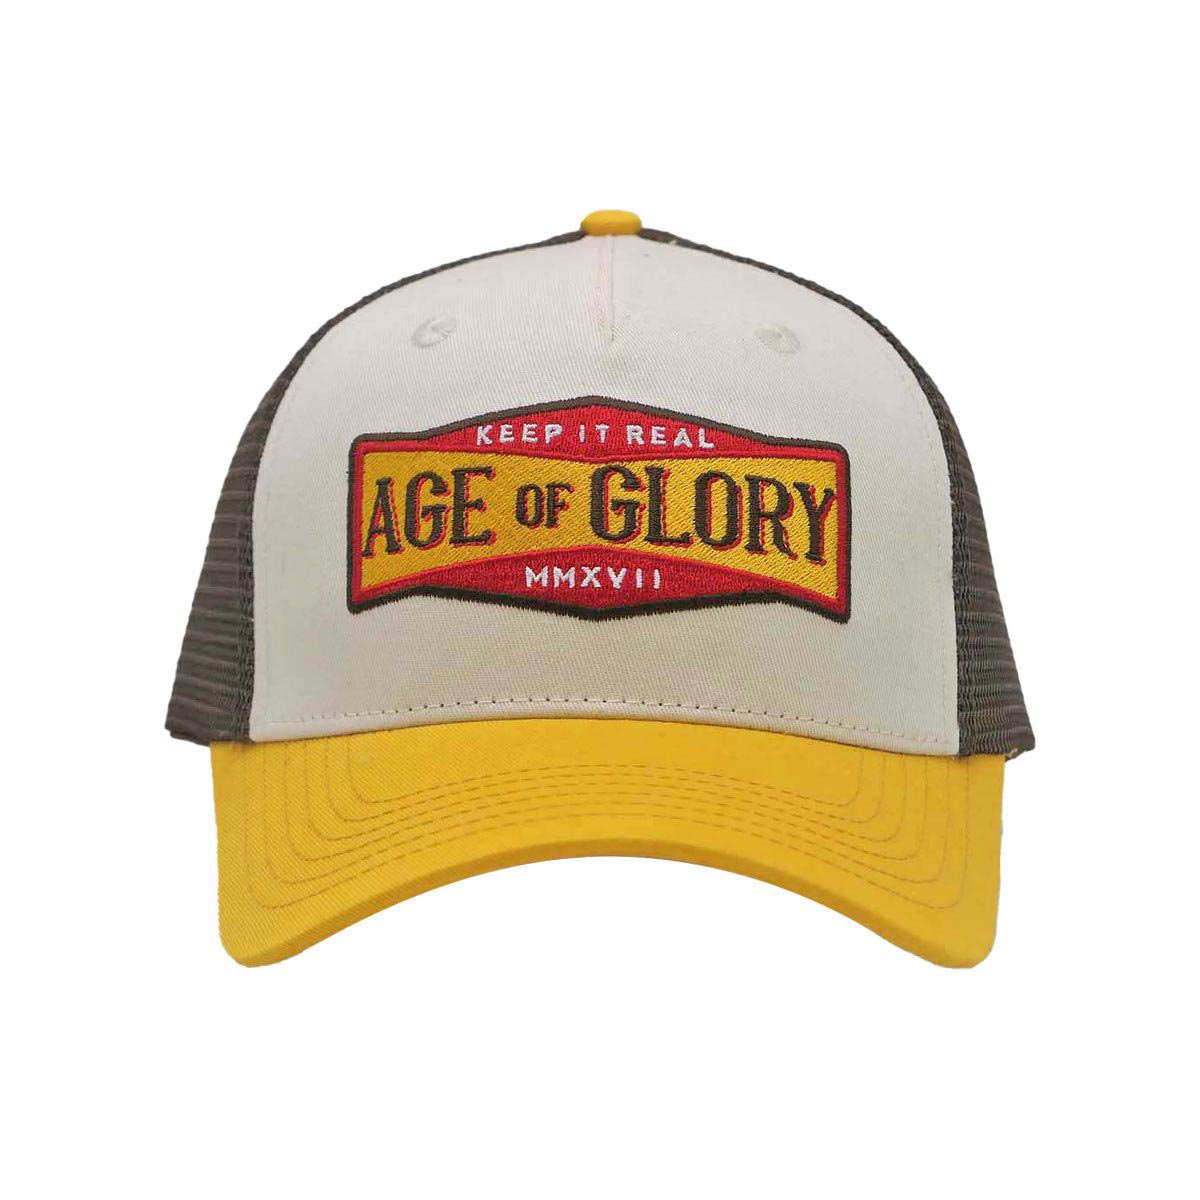 Age of Glory Keep It Real Trucker Cap in Off-White and Yellow - available at Veloce Club